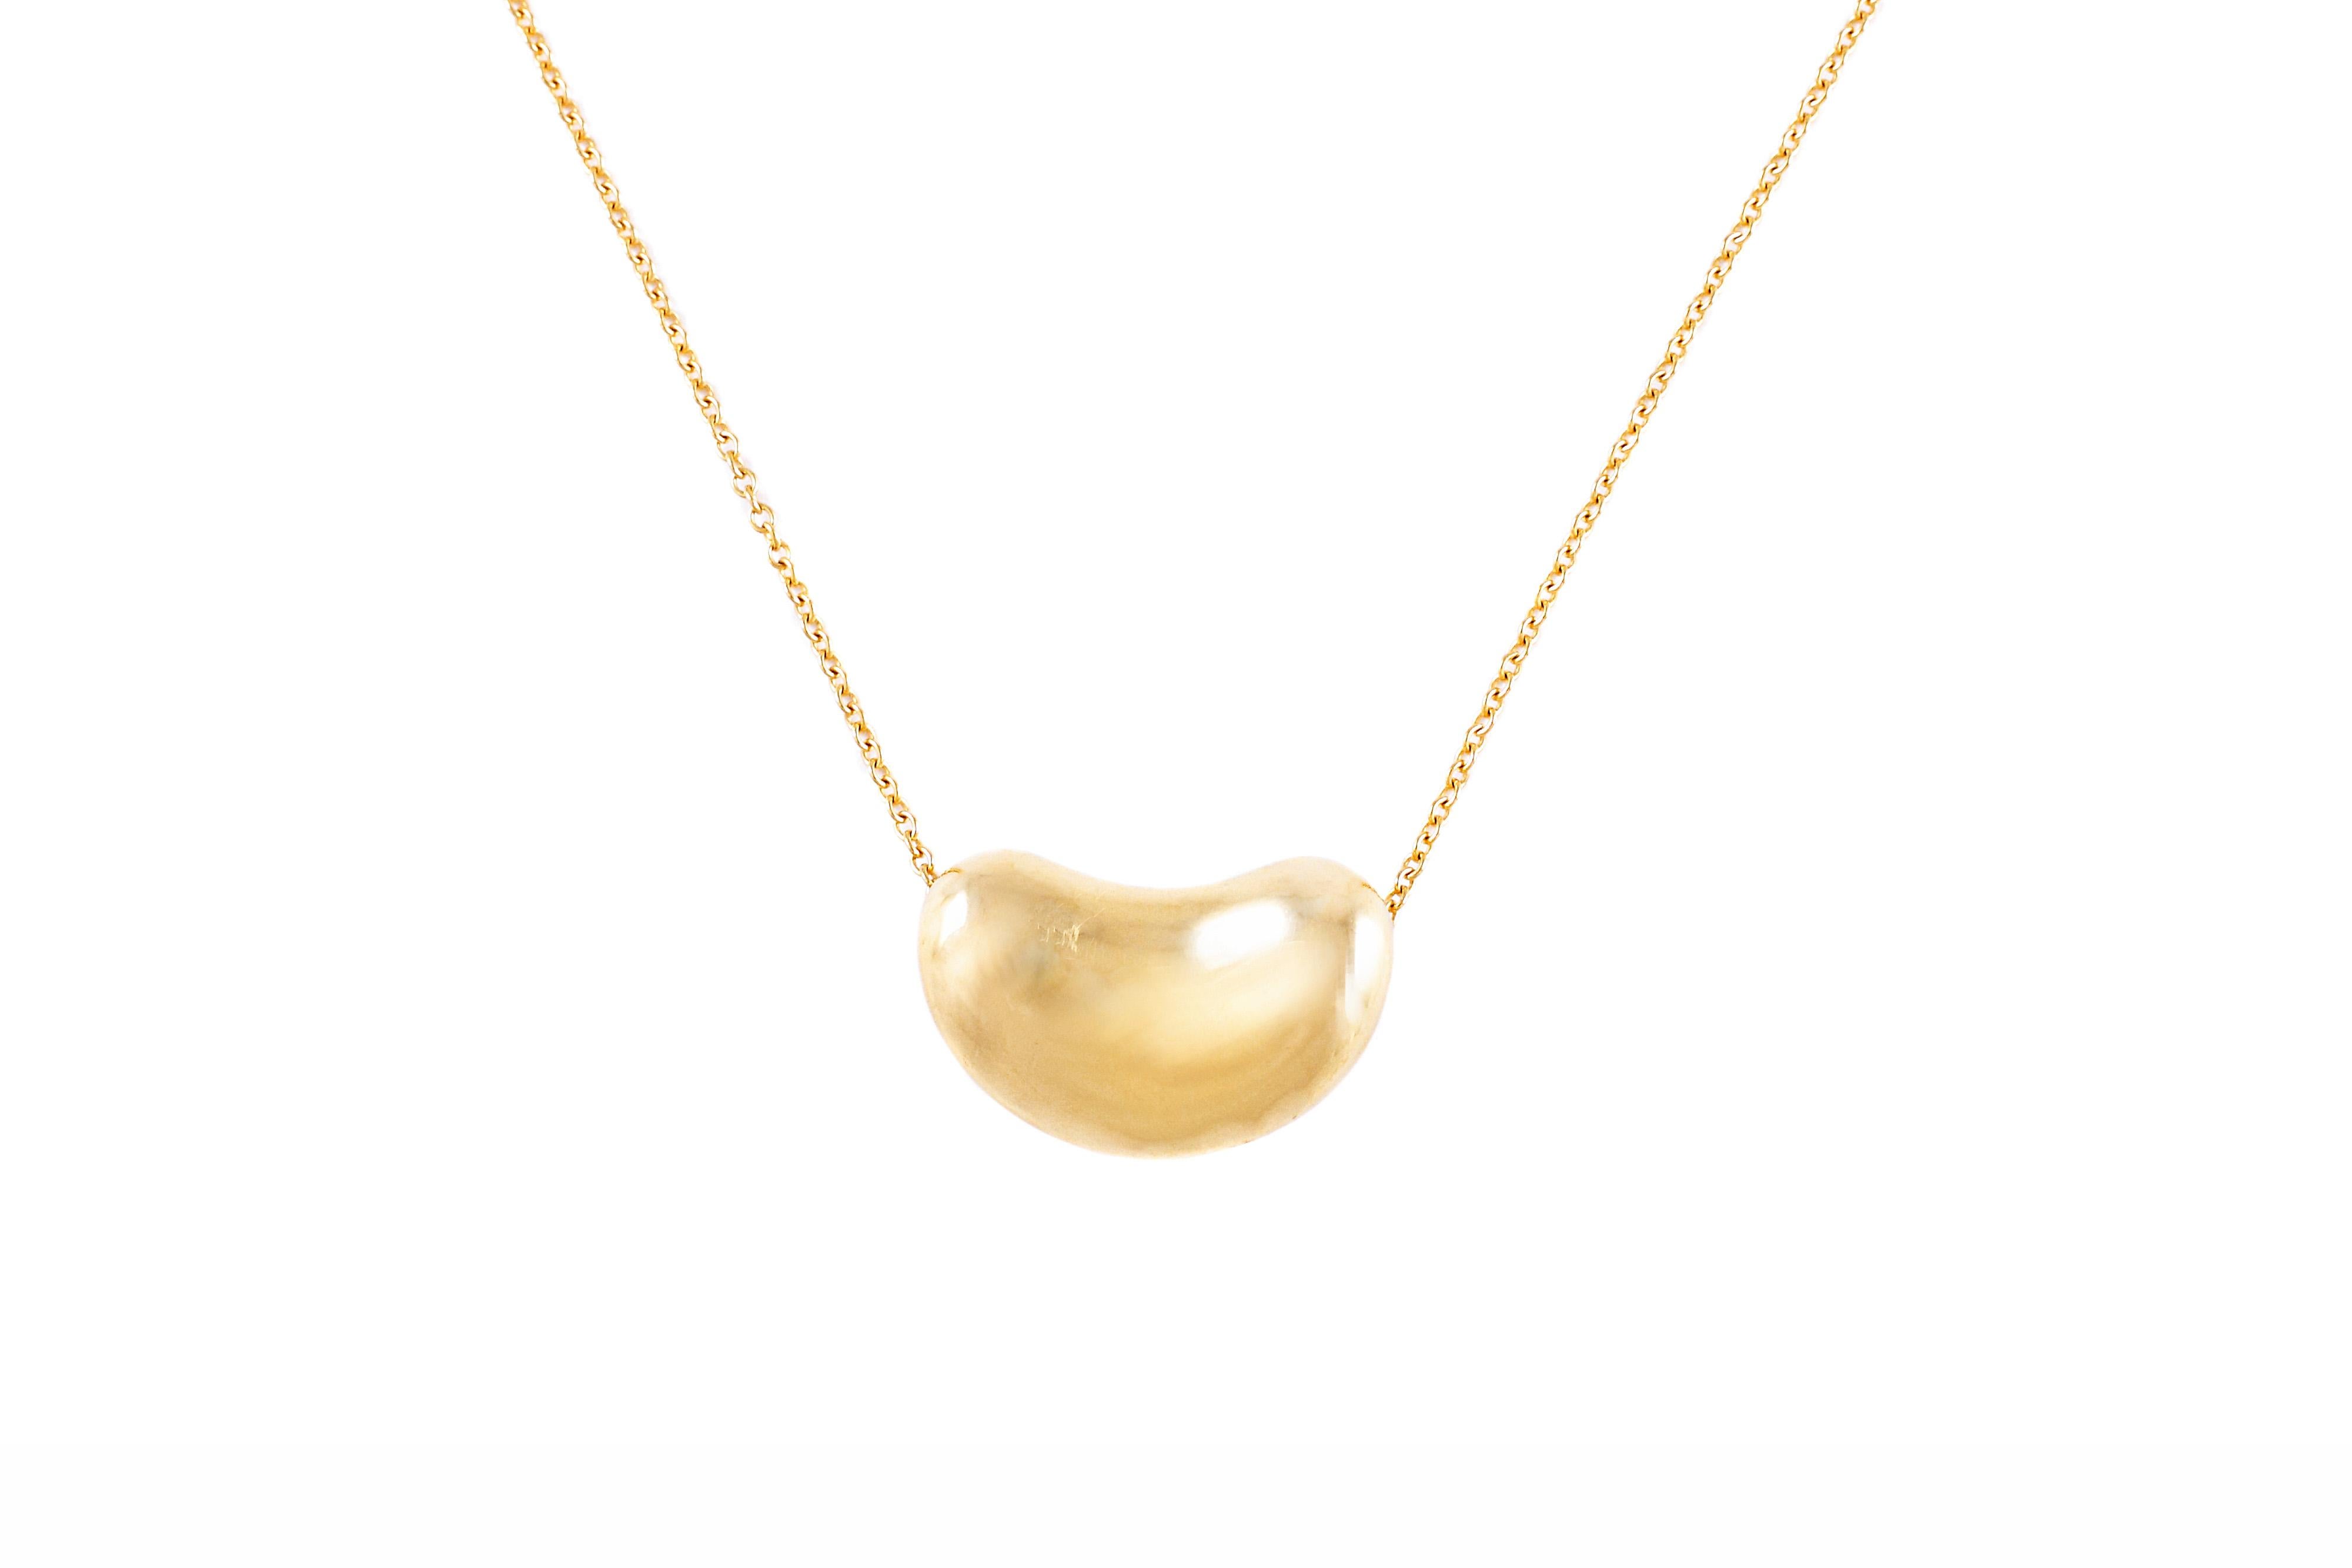 18 karat yellow gold Bean necklace designed by Elsa Peretti for Tiffany & Co.  The bean is 18 millimeters wide and is on a 16 inch chain.